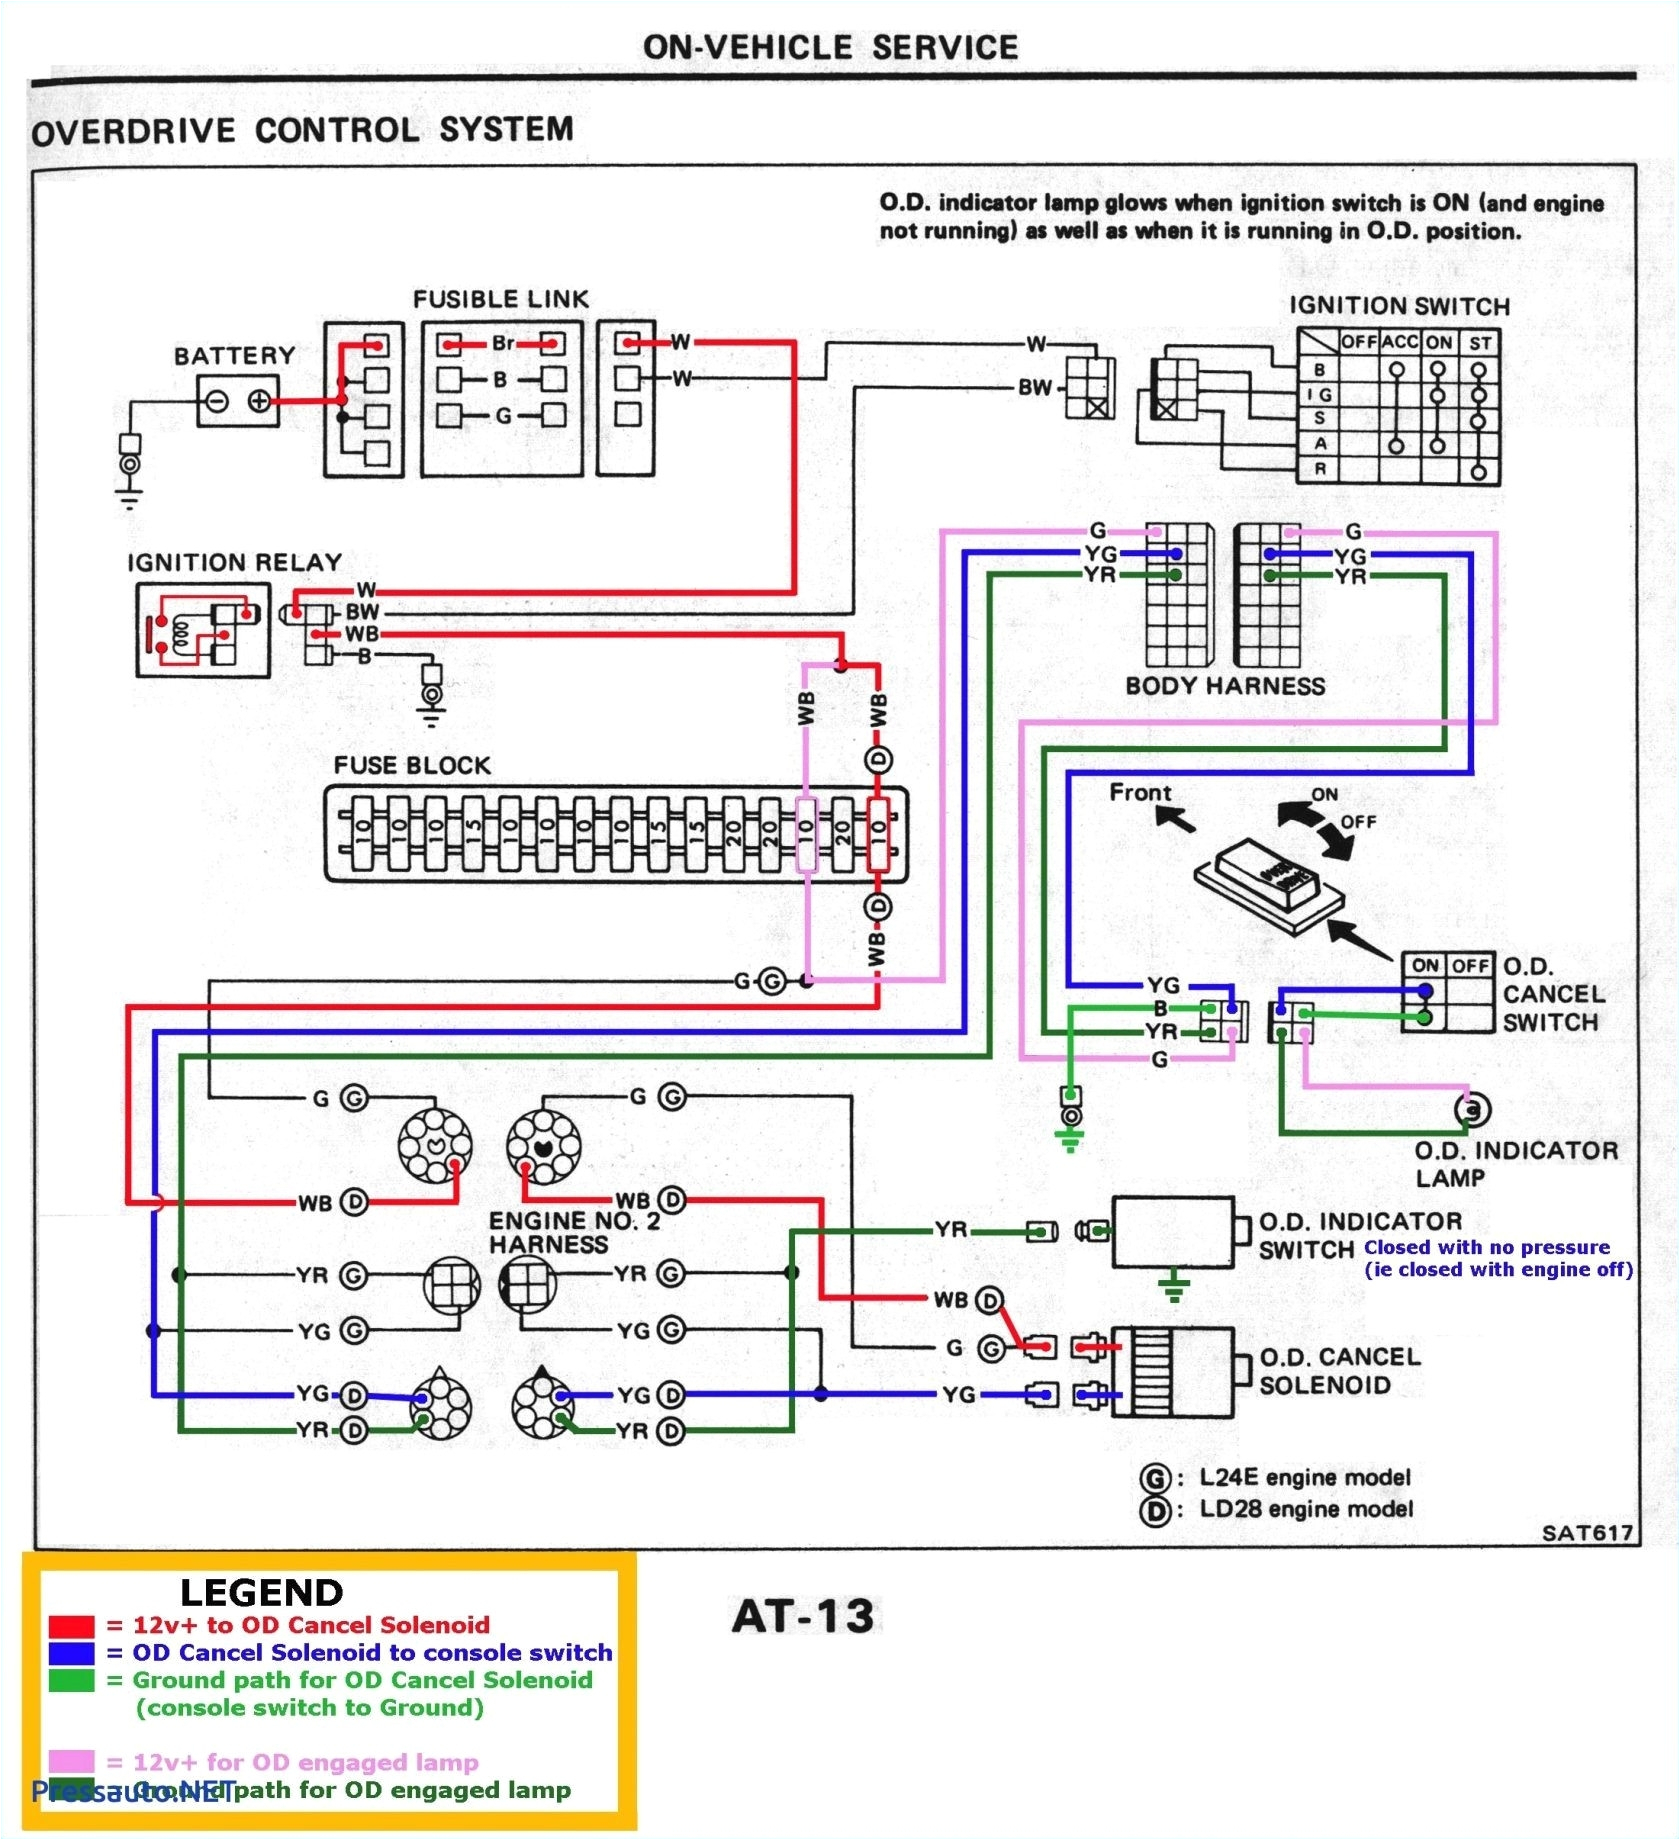 pace trailer wiring diagram wiring diagram for you pace american trailer wiring diagram pace american trailer wiring diagram